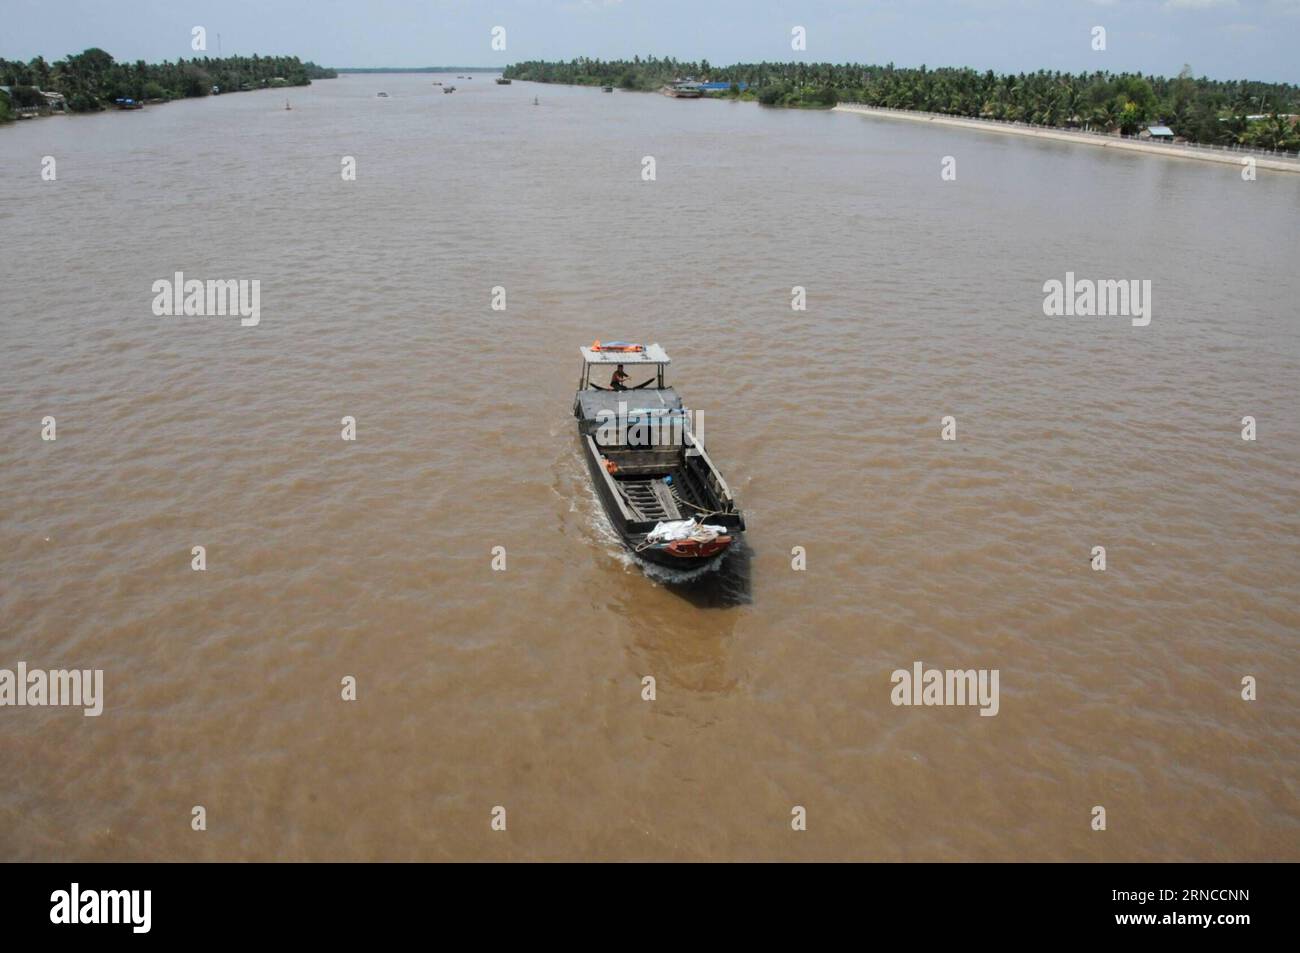 (160405) -- HO CHI MINH CITY, April 5, 2016 -- Photo taken on April 4, 2016, shows the site of fast-flowing river surging downstream to the Mekong Delta in Ben Tre province, Vietnam. Since late 2015, countries along the Lancang-Mekong River, including Vietnam, have suffered from drought to varying extents due to the impact of the El Nino phenomenon. China released an emergency water supply from its Jinghong Hydropower Station in the southwest Yunnan province to feed the downstream Mekong River between March 15 and April 10, helped to greatly alleviate the devastating situation. So far water di Stock Photo